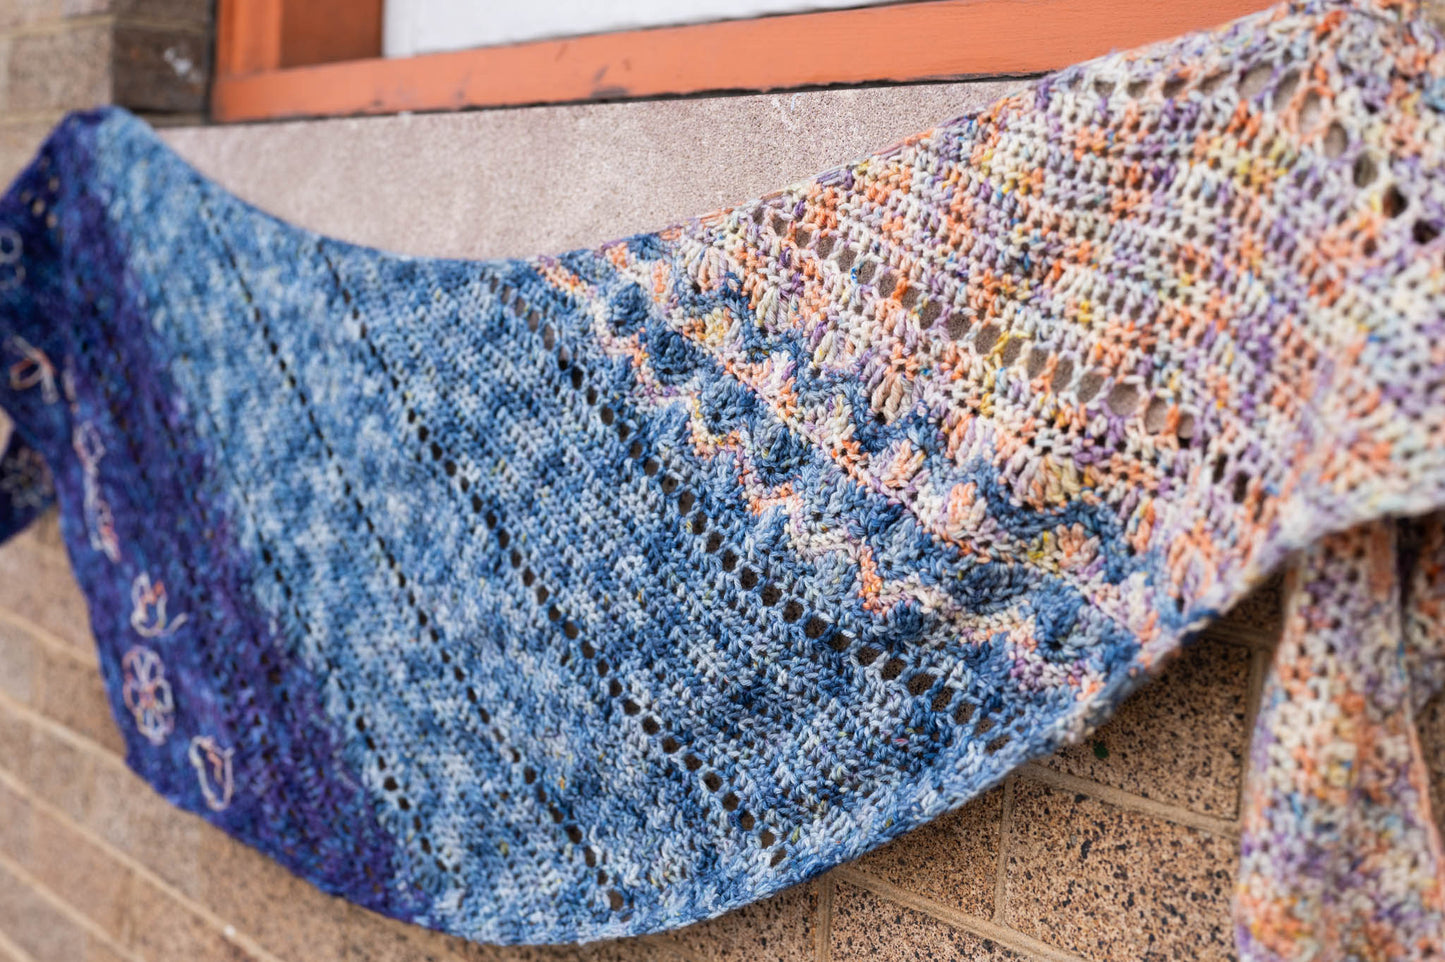 A side view emphasizing the texture of the Replenishment crochet shawl.